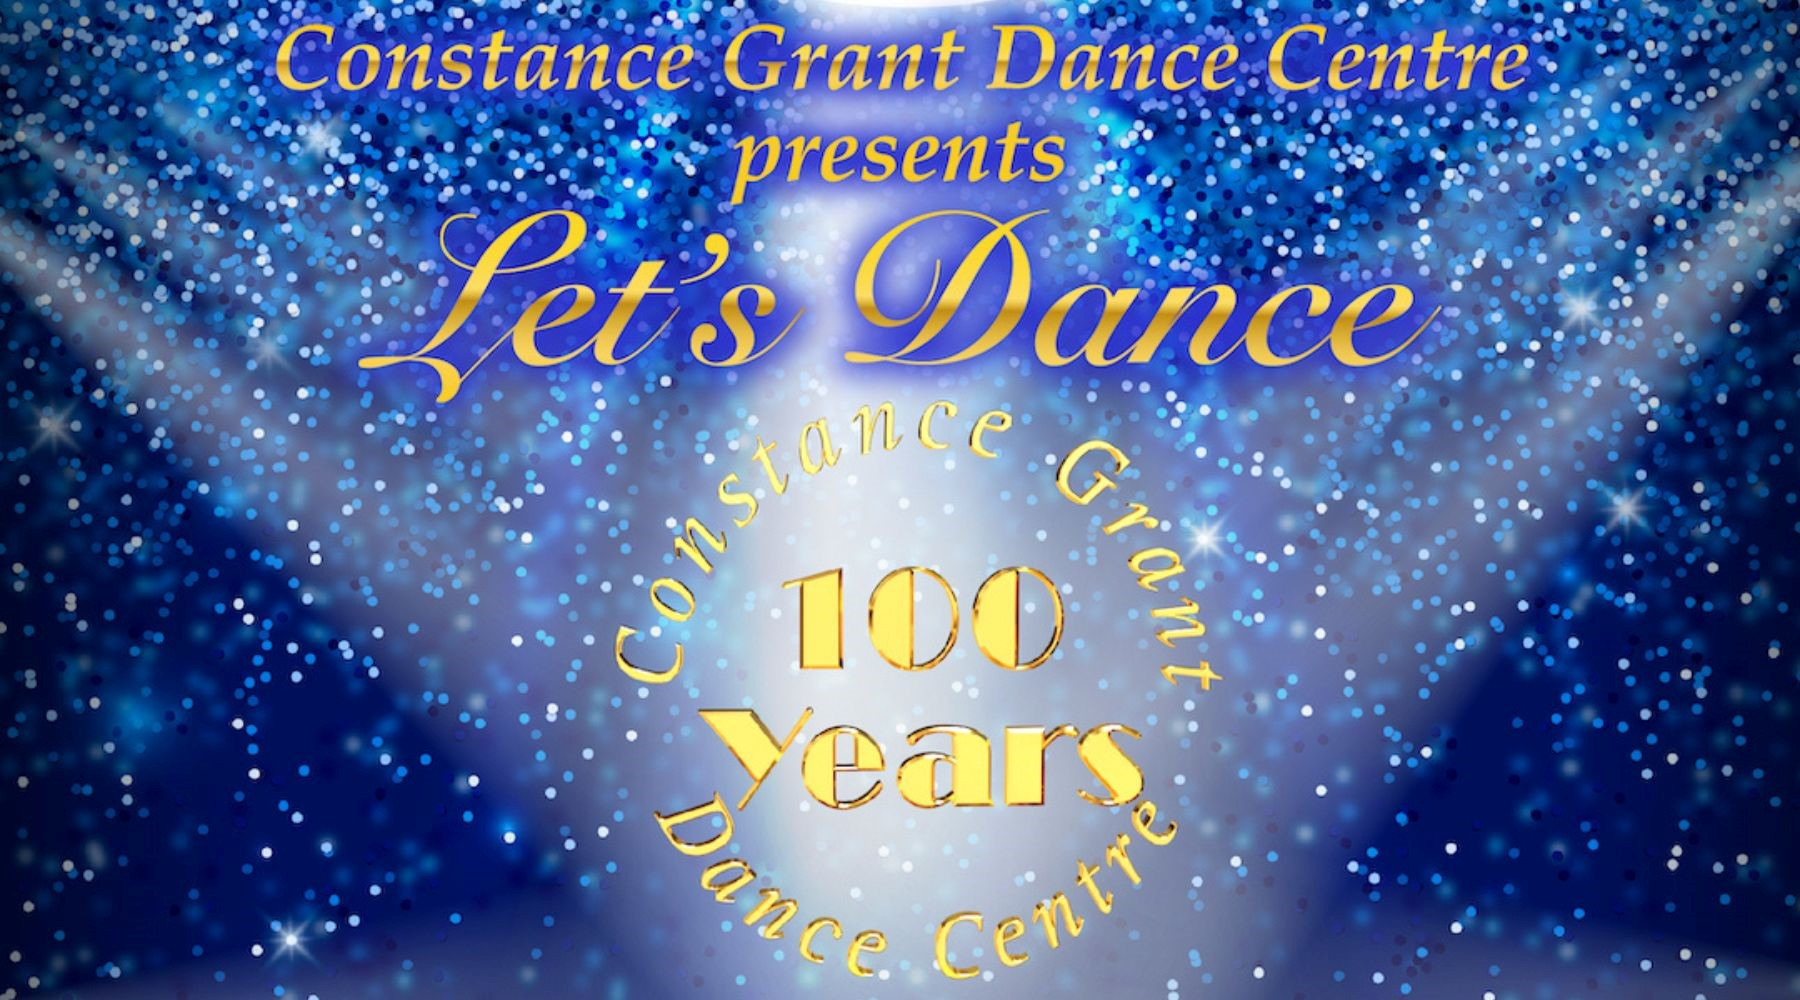 Image name Lets Dance 100 Years of CGDC at Sheffield City Hall Oval Hall Sheffield 1 the 2 image from the post Let's Dance - 100 Years of CGDC at Sheffield City Hall Oval Hall, Sheffield in Yorkshire.com.